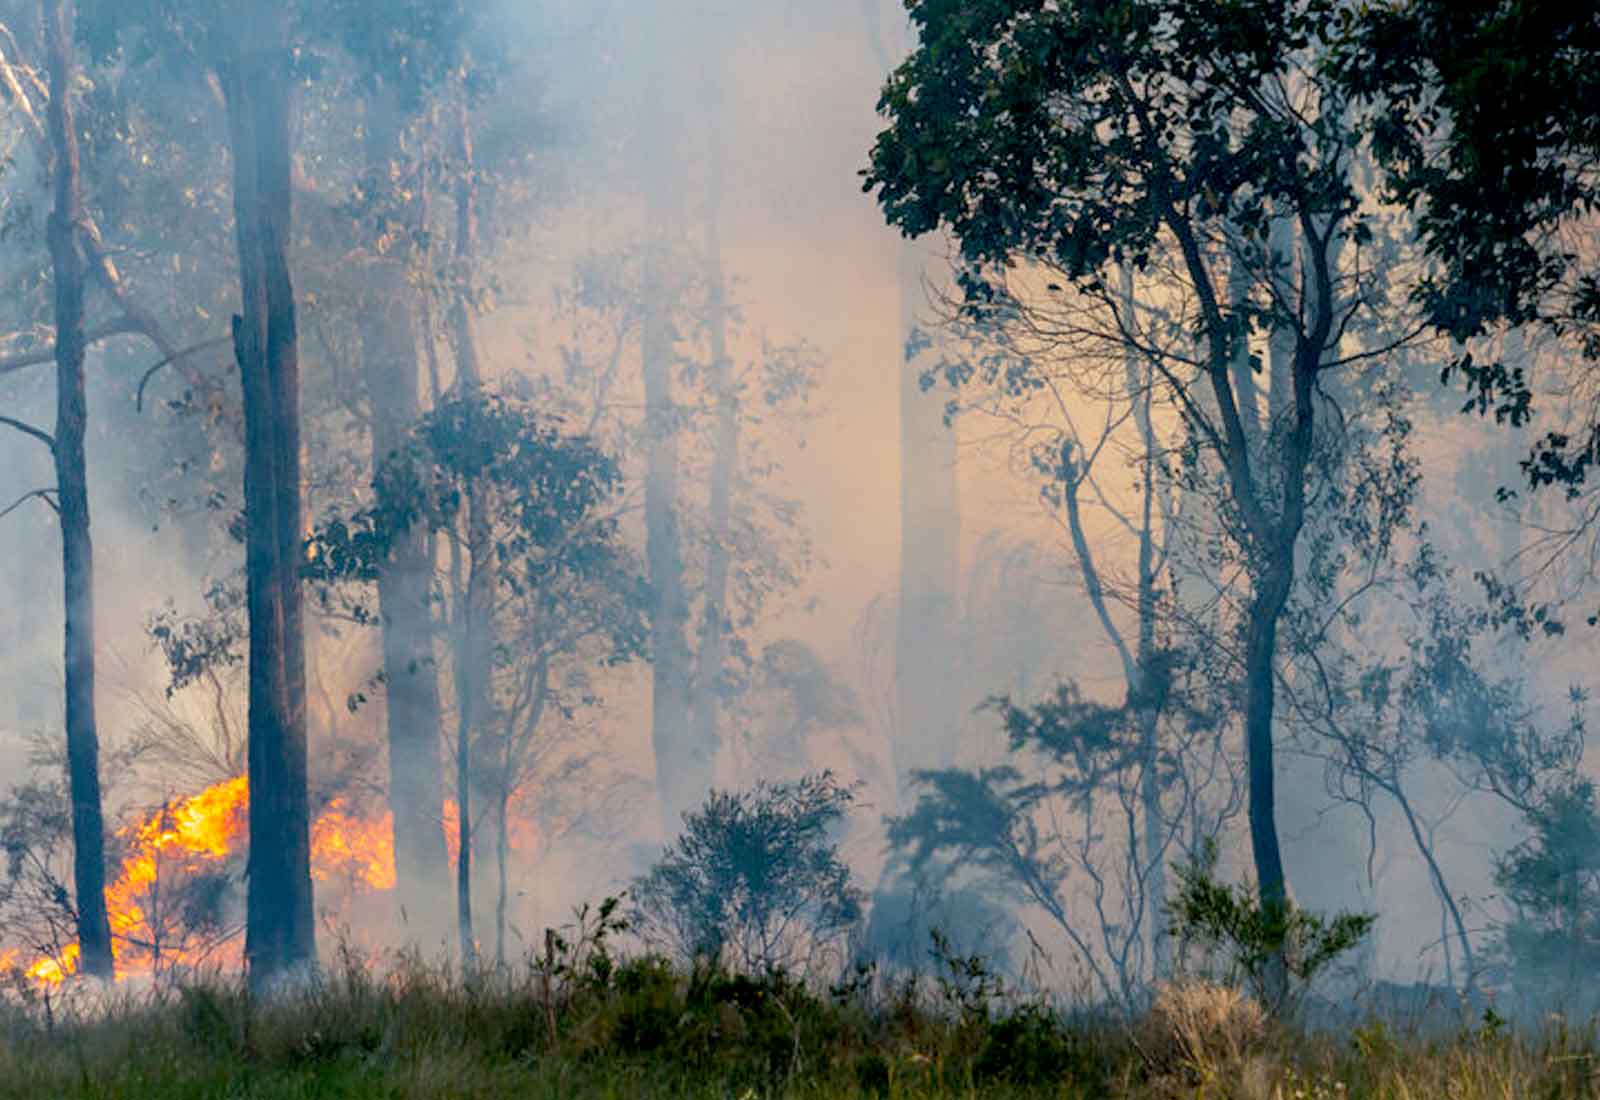 Harms from bushfire smoke: “yesterday was the time to talk about it”